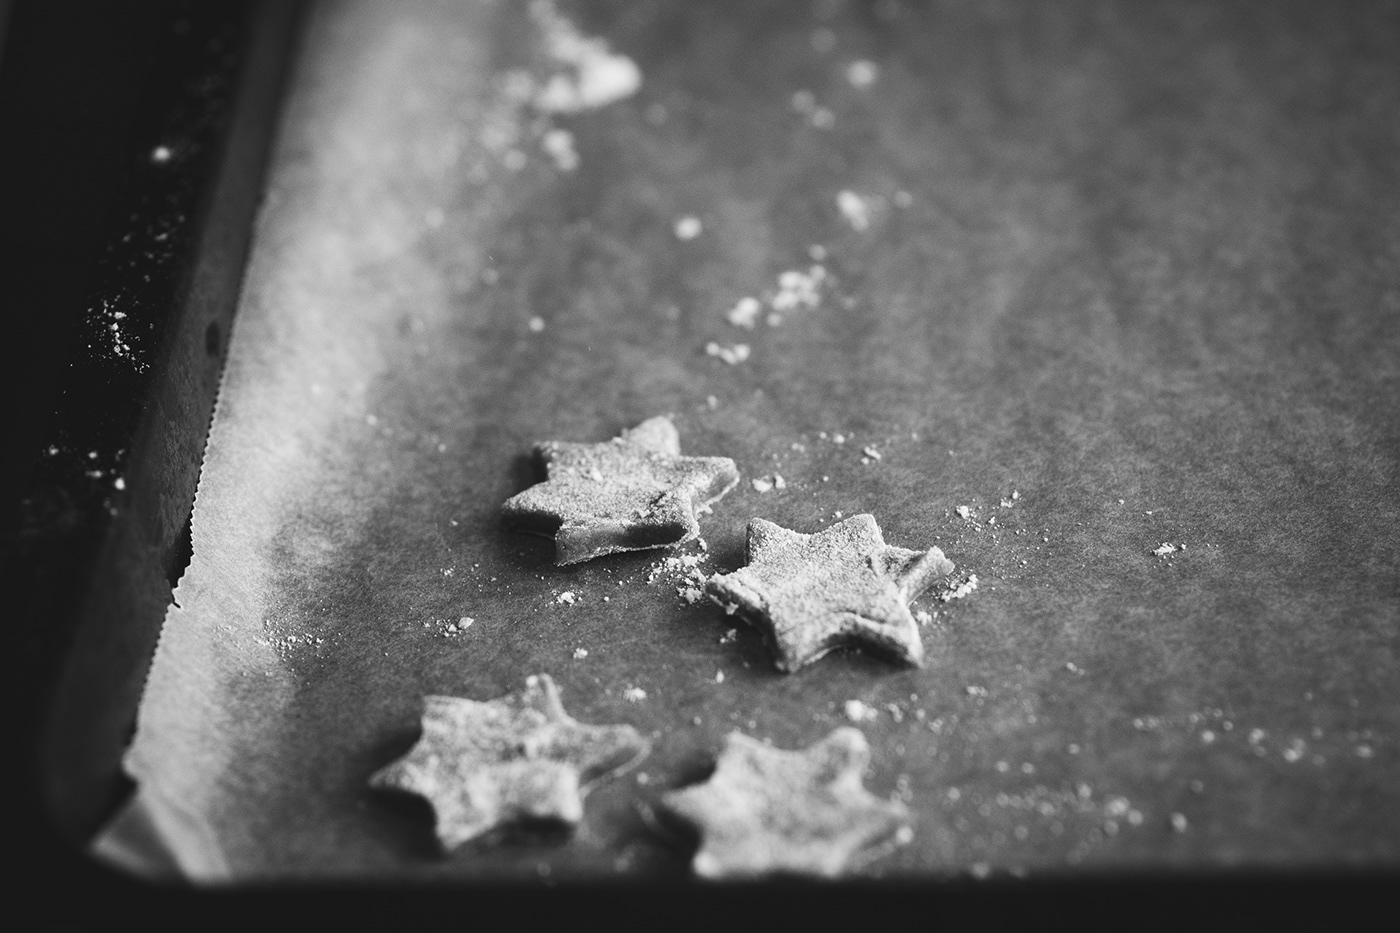 baking cookies Cookies Photography black and white monochrome bnw bnwphotography kitchen fine art photography bnw photography